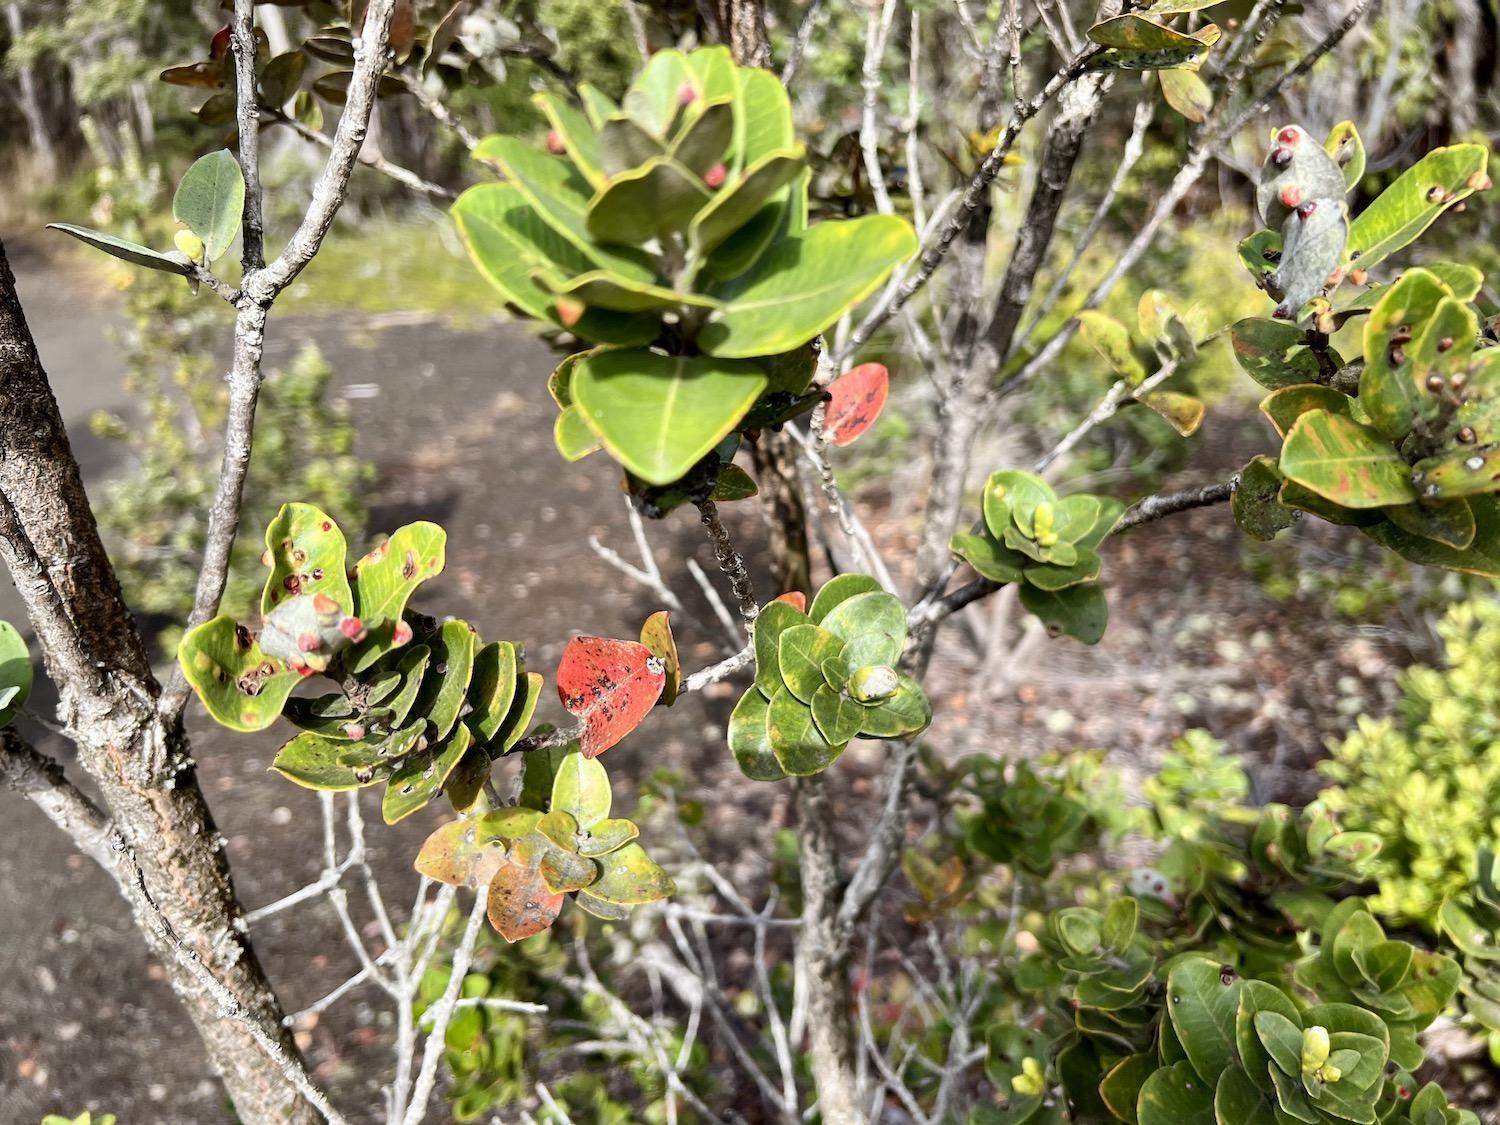 Jane Field spotted this ailing ʻŌhiʻa tree while we headed out to tackle invasive species.